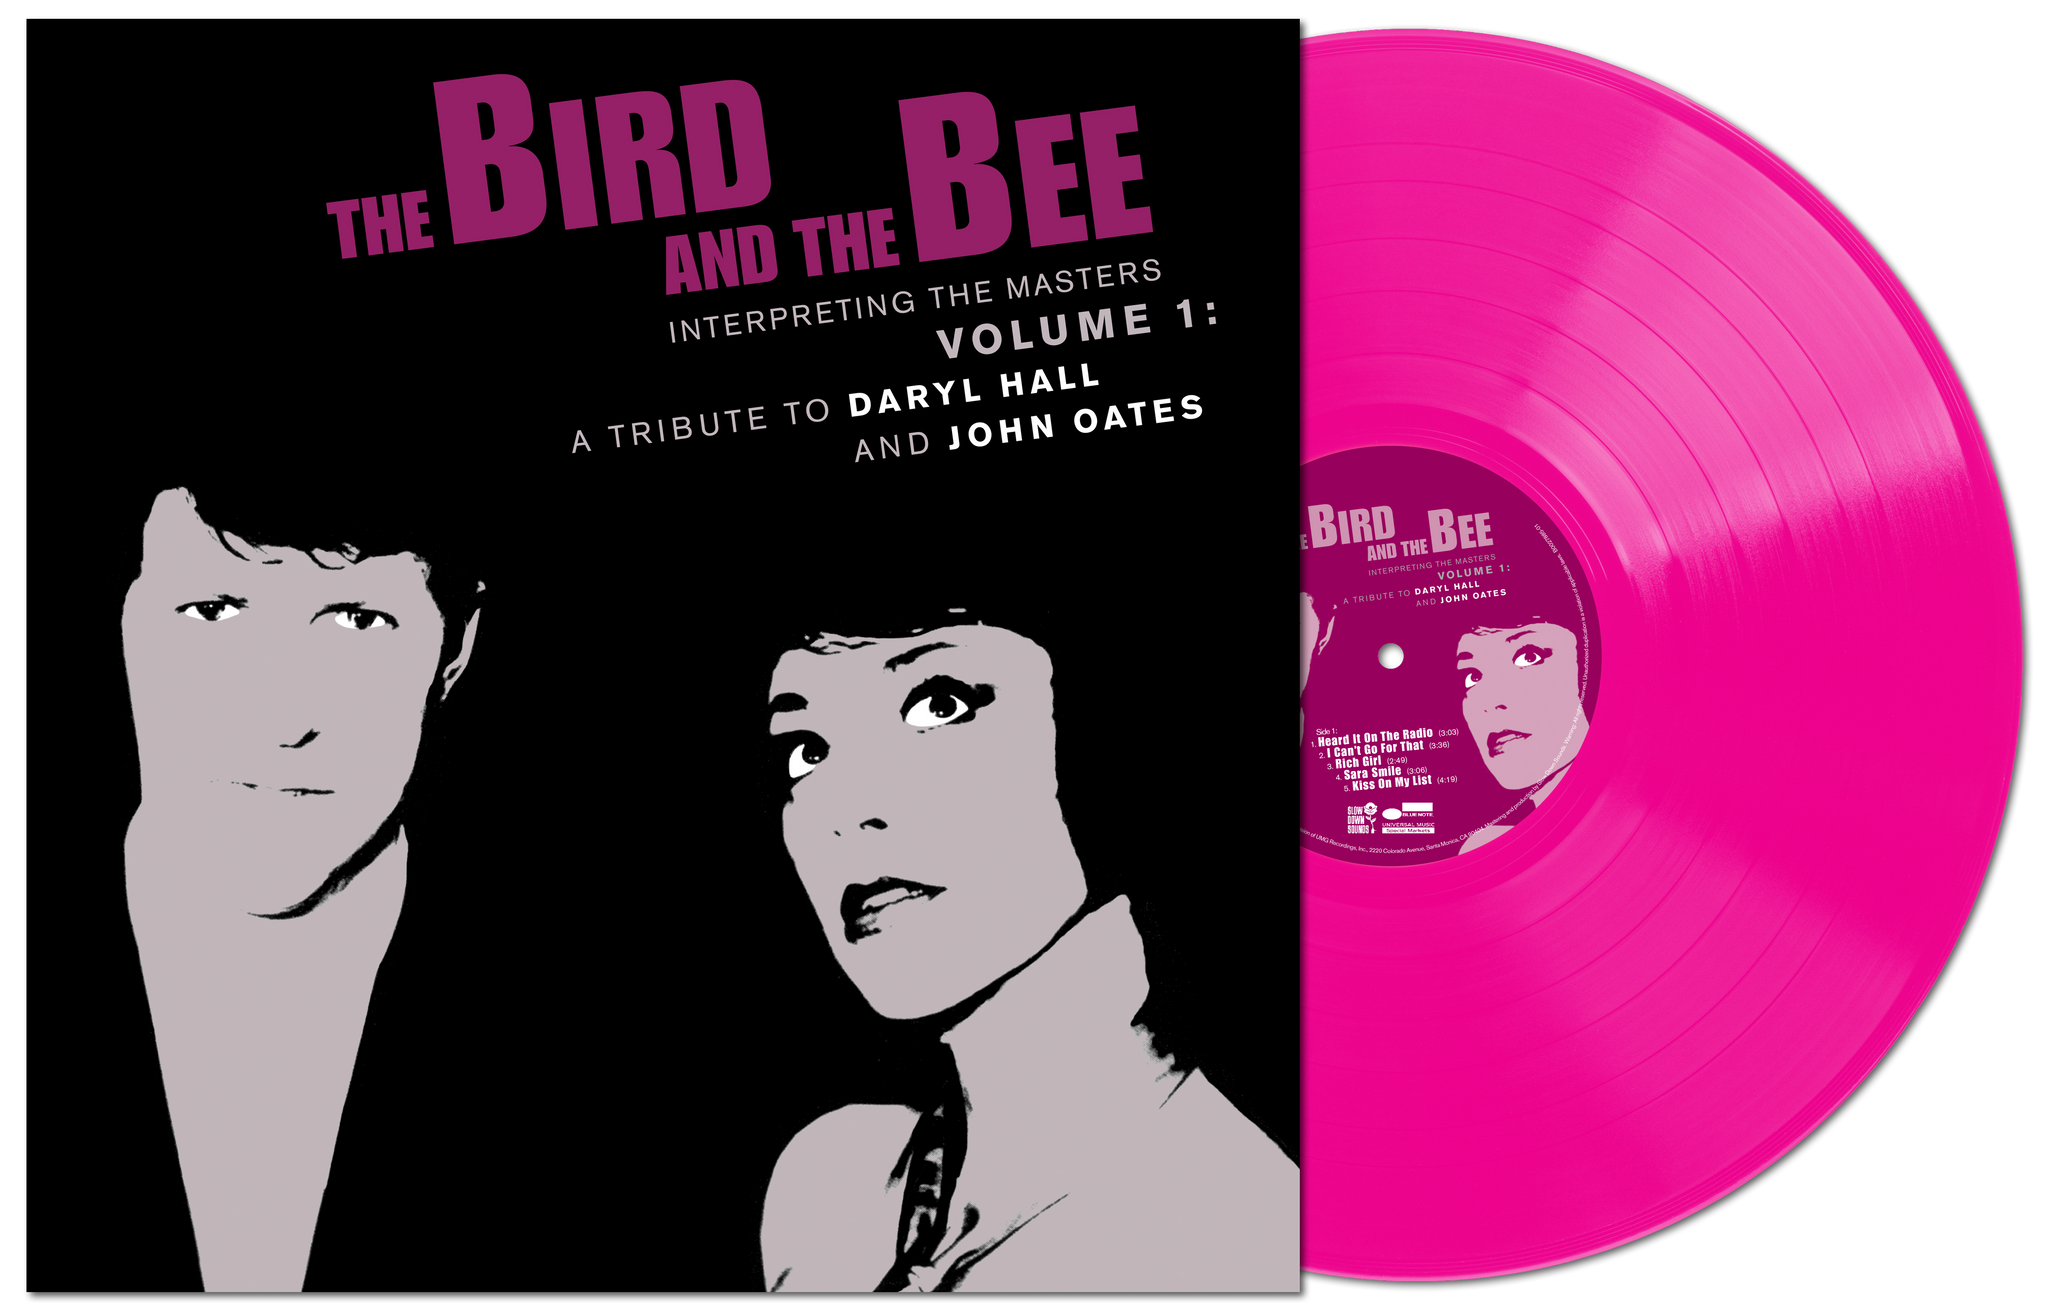 Pink Vinyl Cover for The Bird and the Bee Interpreting the masters volume 1: a tribute to Daryl Hall and John Oates, Colored Vinyl